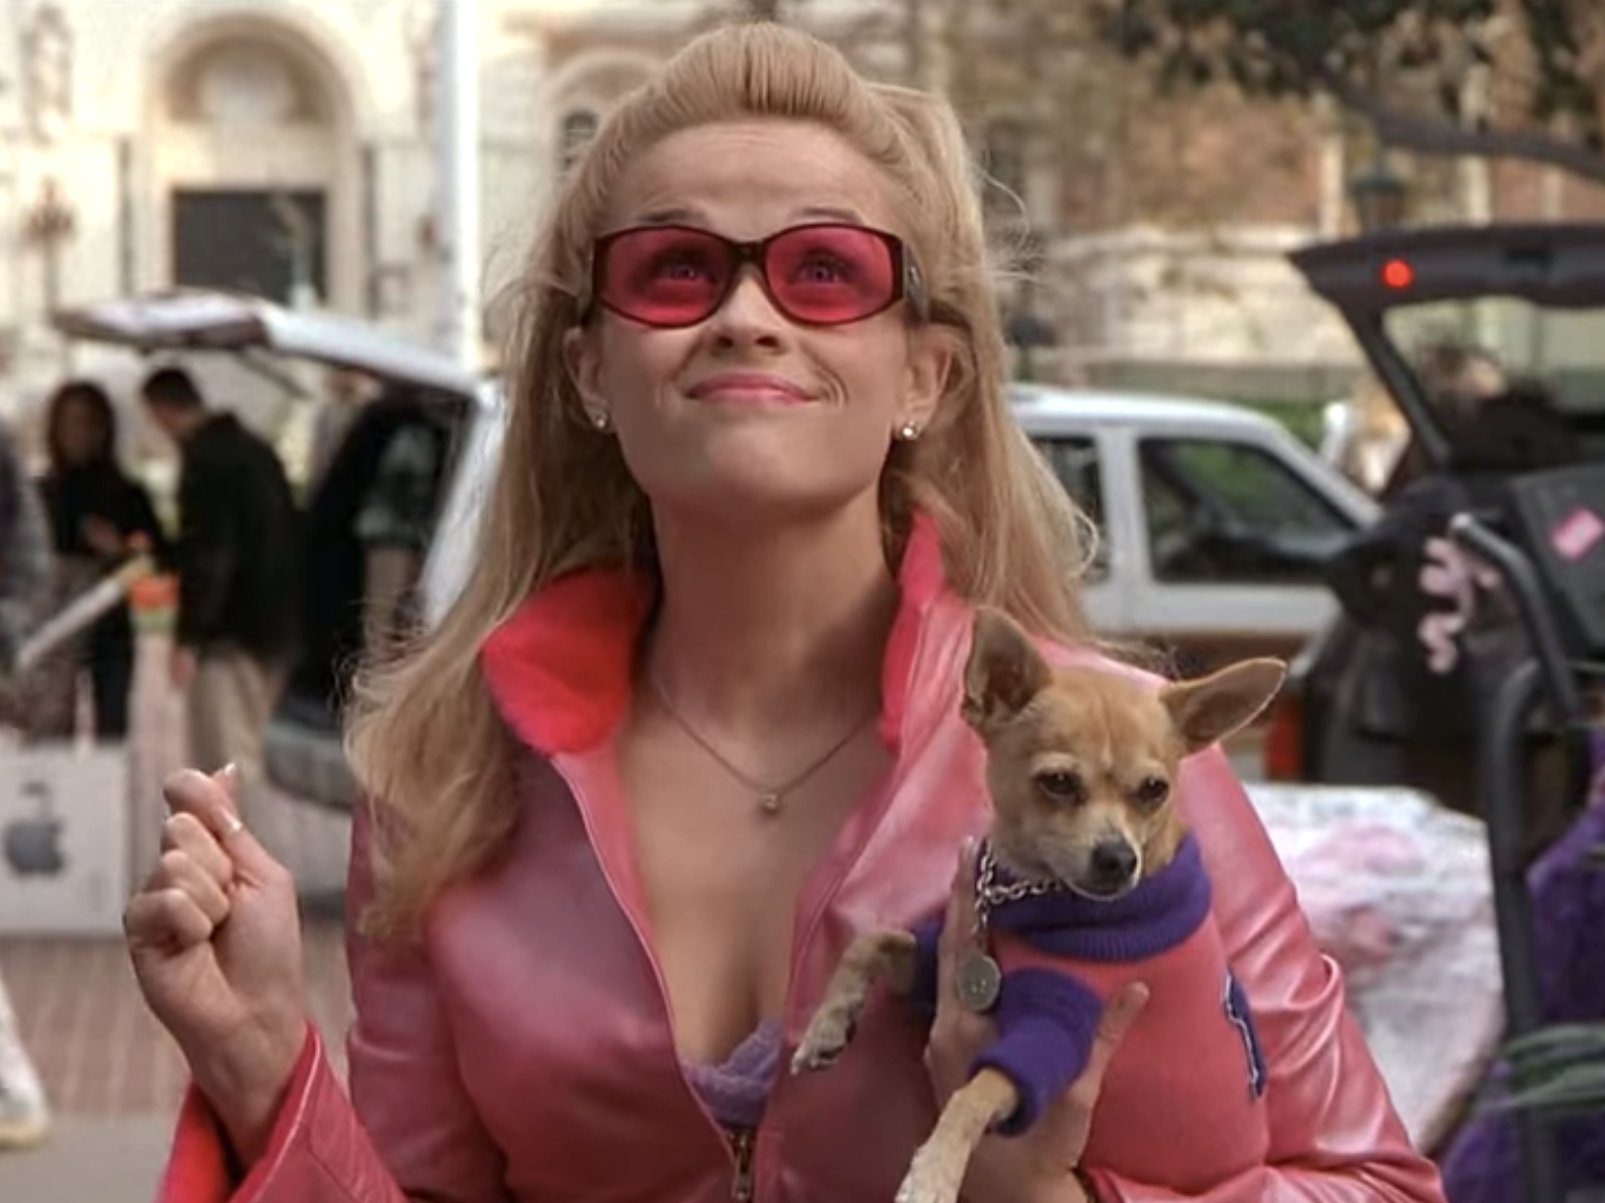 Reese Witherspoon wearing a pink outfit and holding a dog in "Legally Blonde."